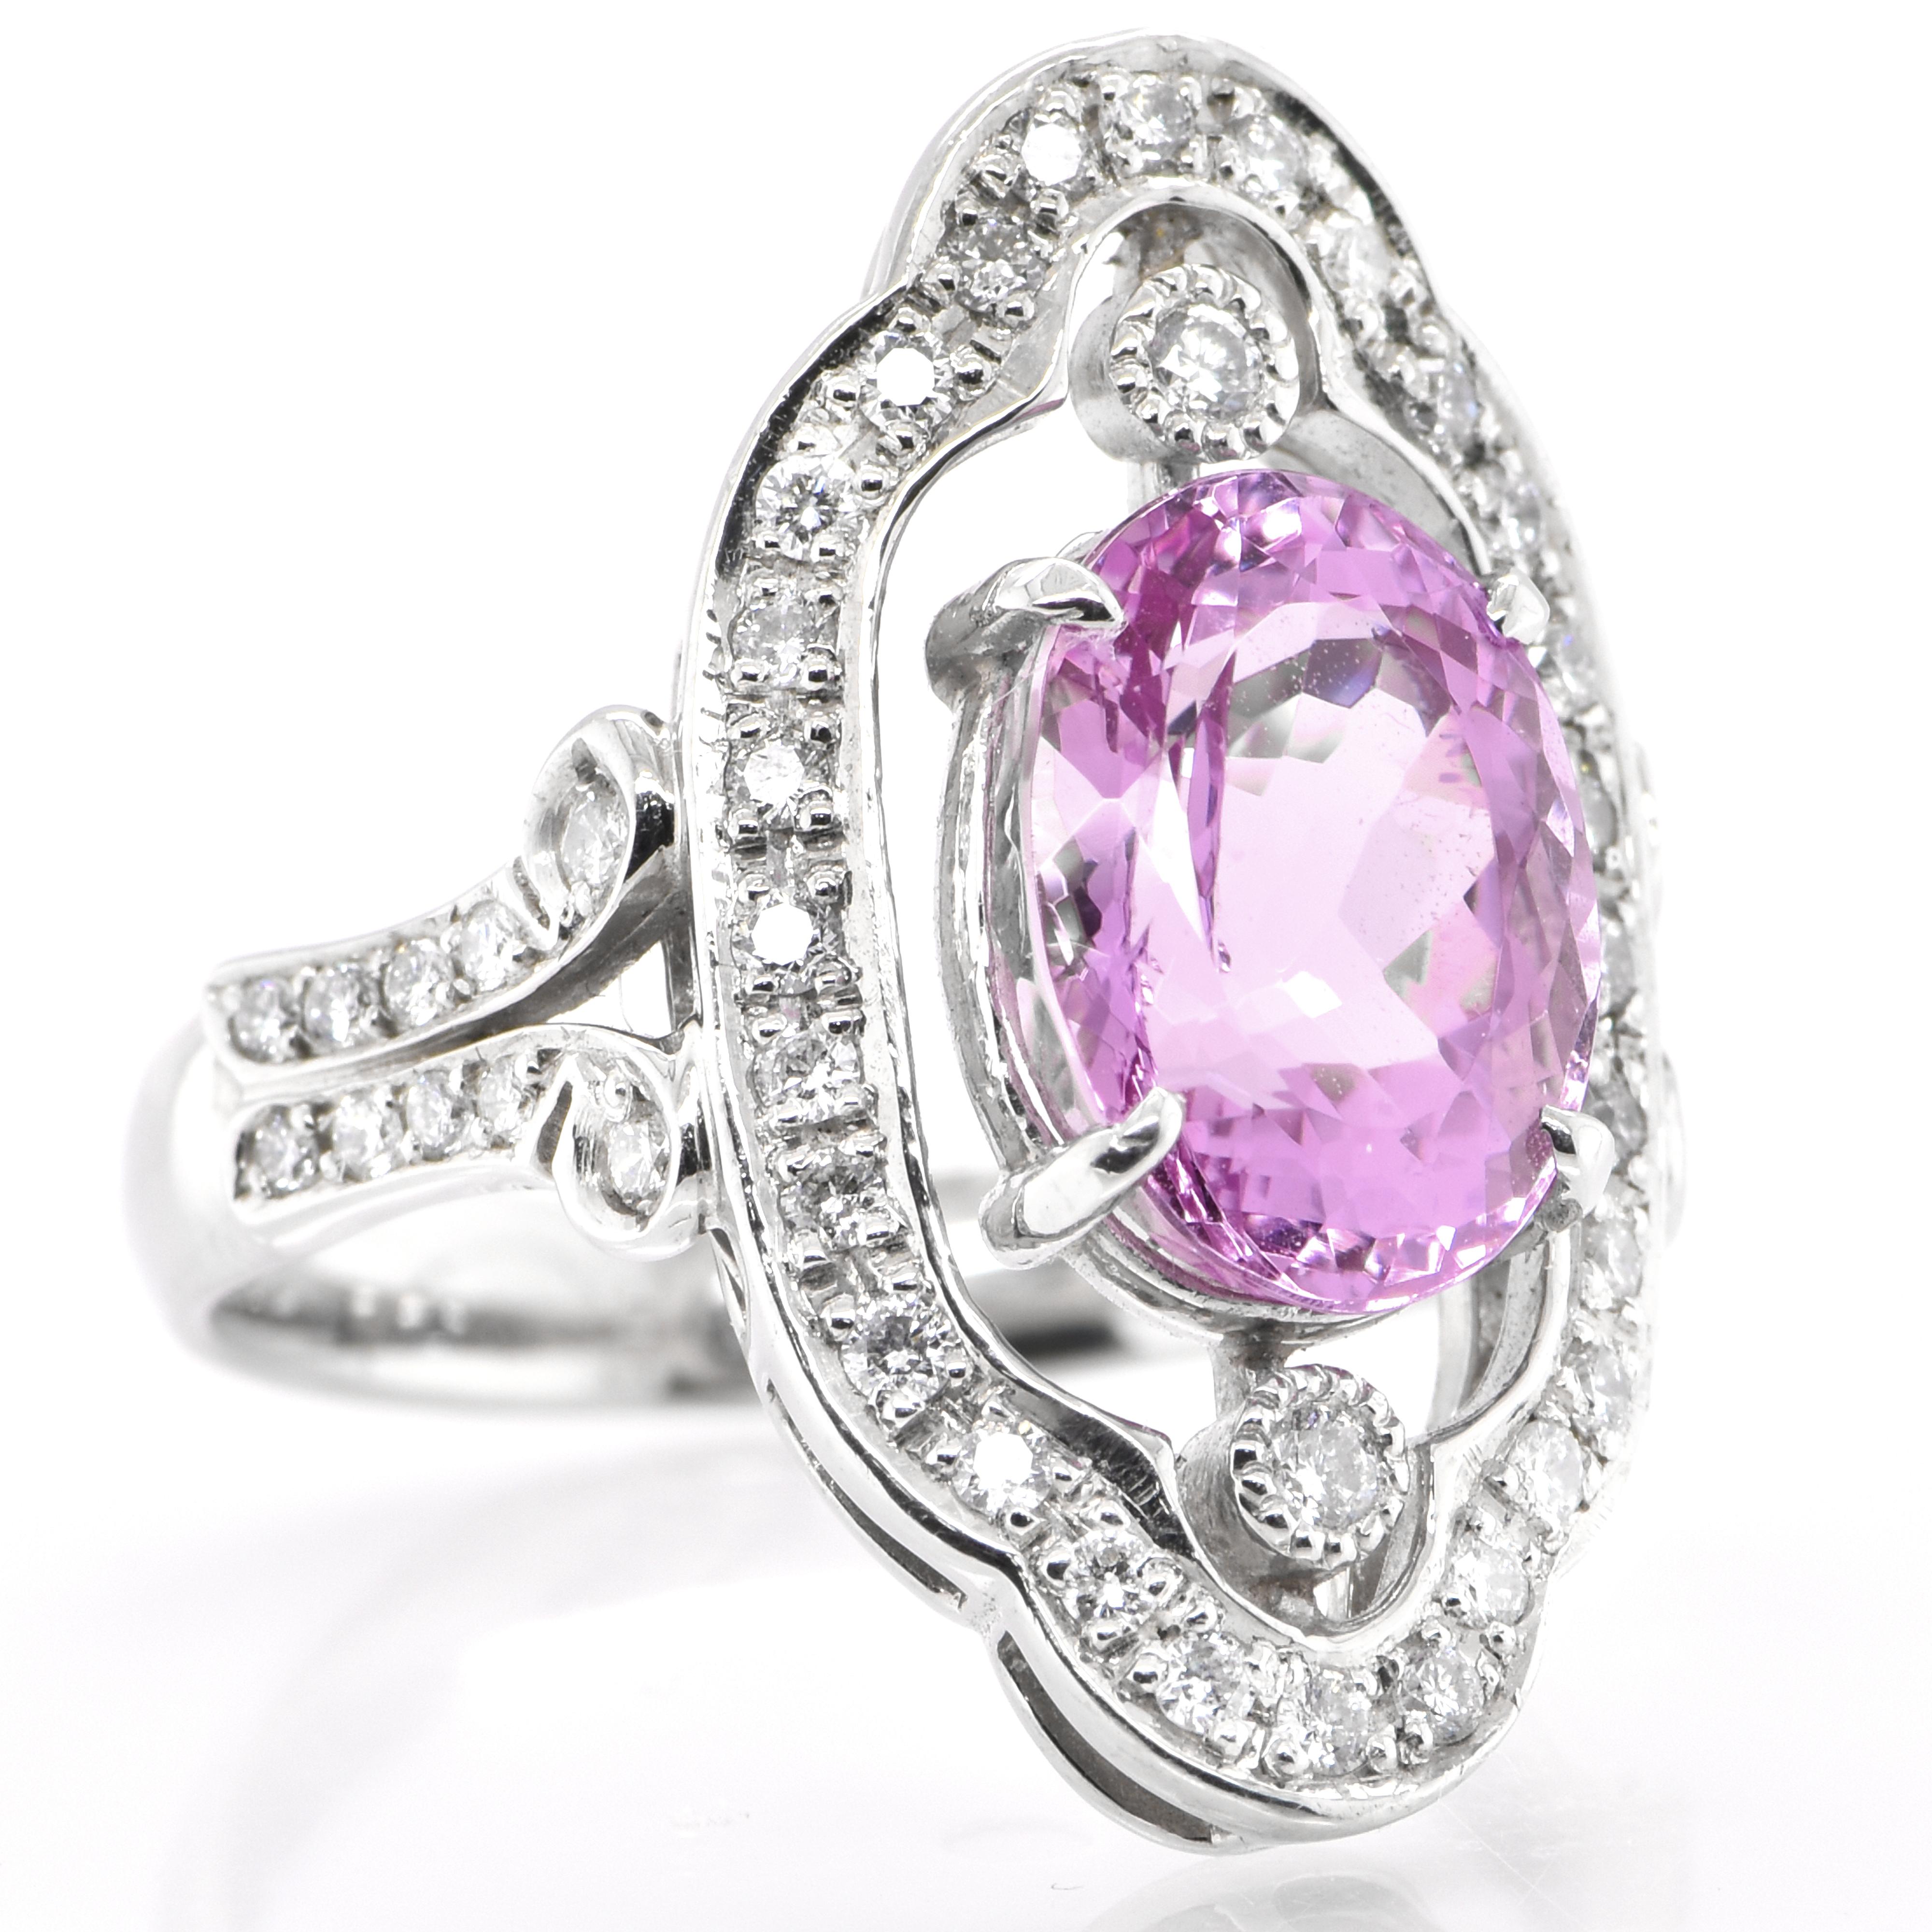 Oval Cut Art Deco Style 4.15 Carat Natural Pink Topaz and Diamond Ring Set in Platinum